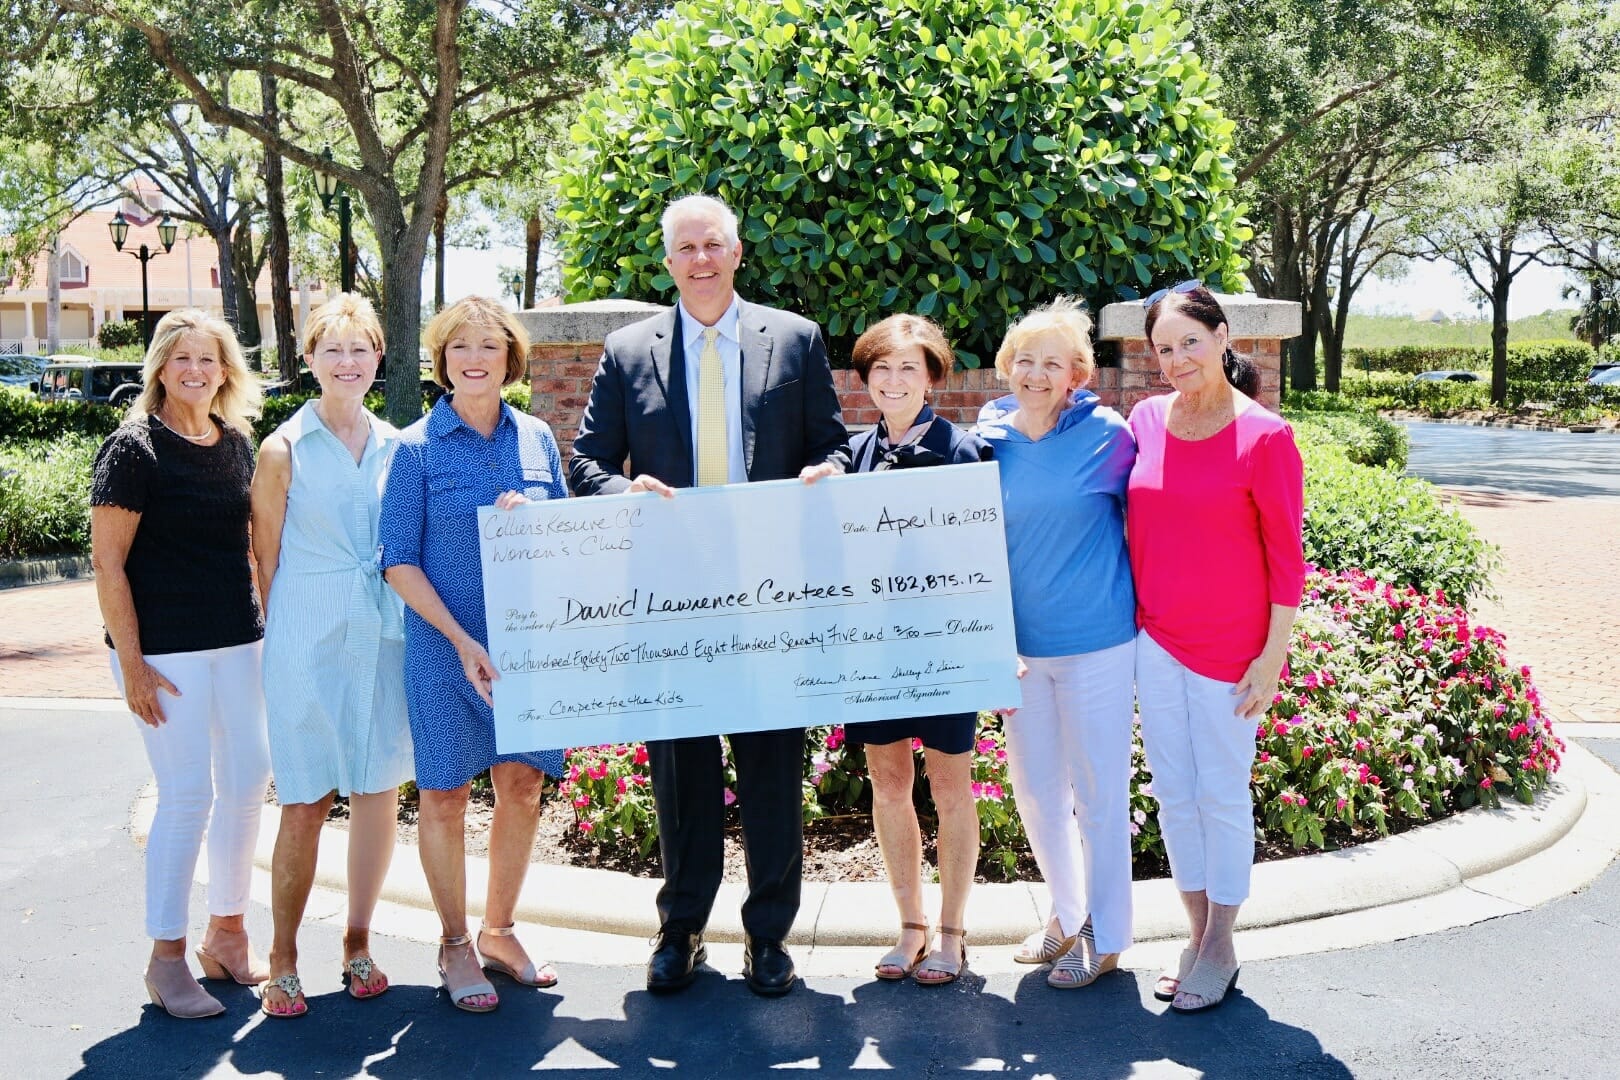 Collier’s Reserve Country Club Women’s Club Raises $183,000 to Expand Children’s Crisis Services at David Lawrence Centers